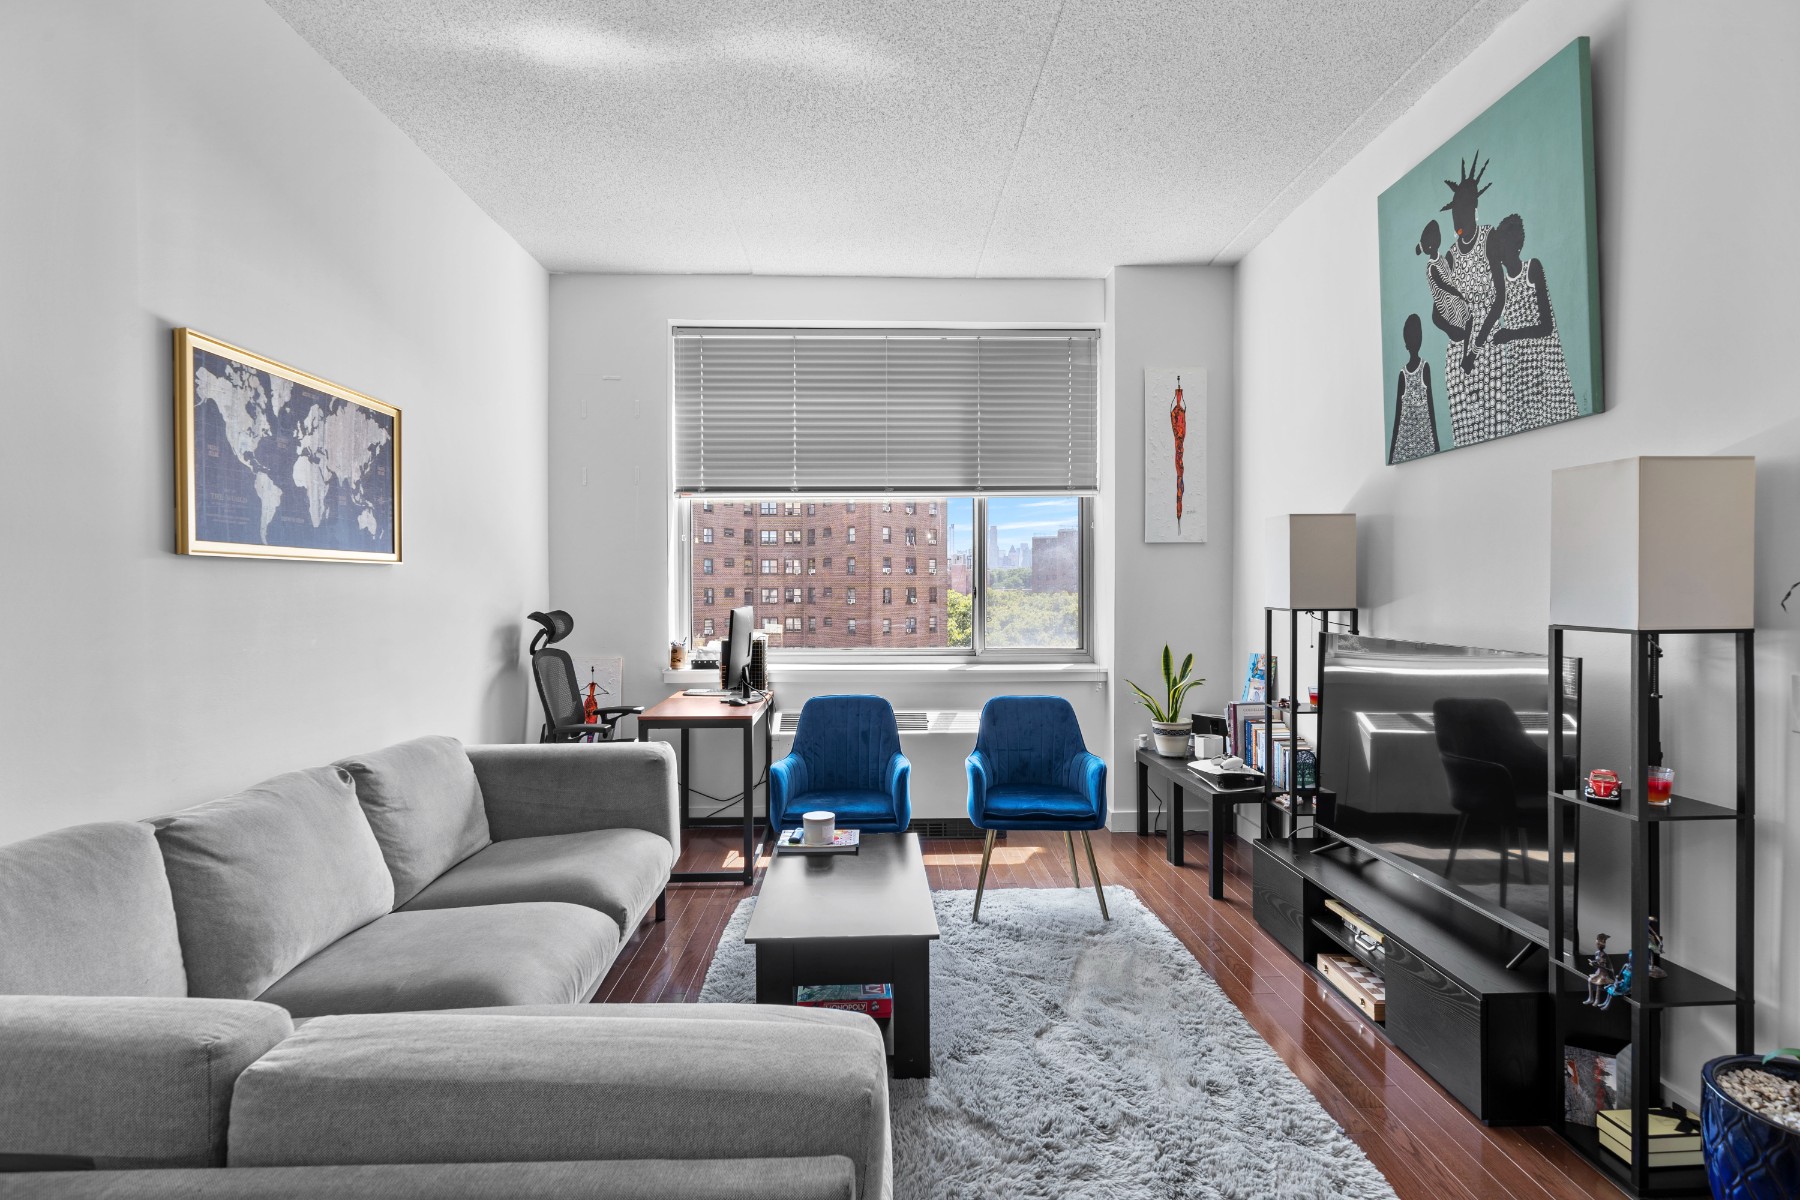 40 West 116th Street A814, Harlem, Upper Manhattan, NYC - 2 Bedrooms  
2 Bathrooms  
6 Rooms - 